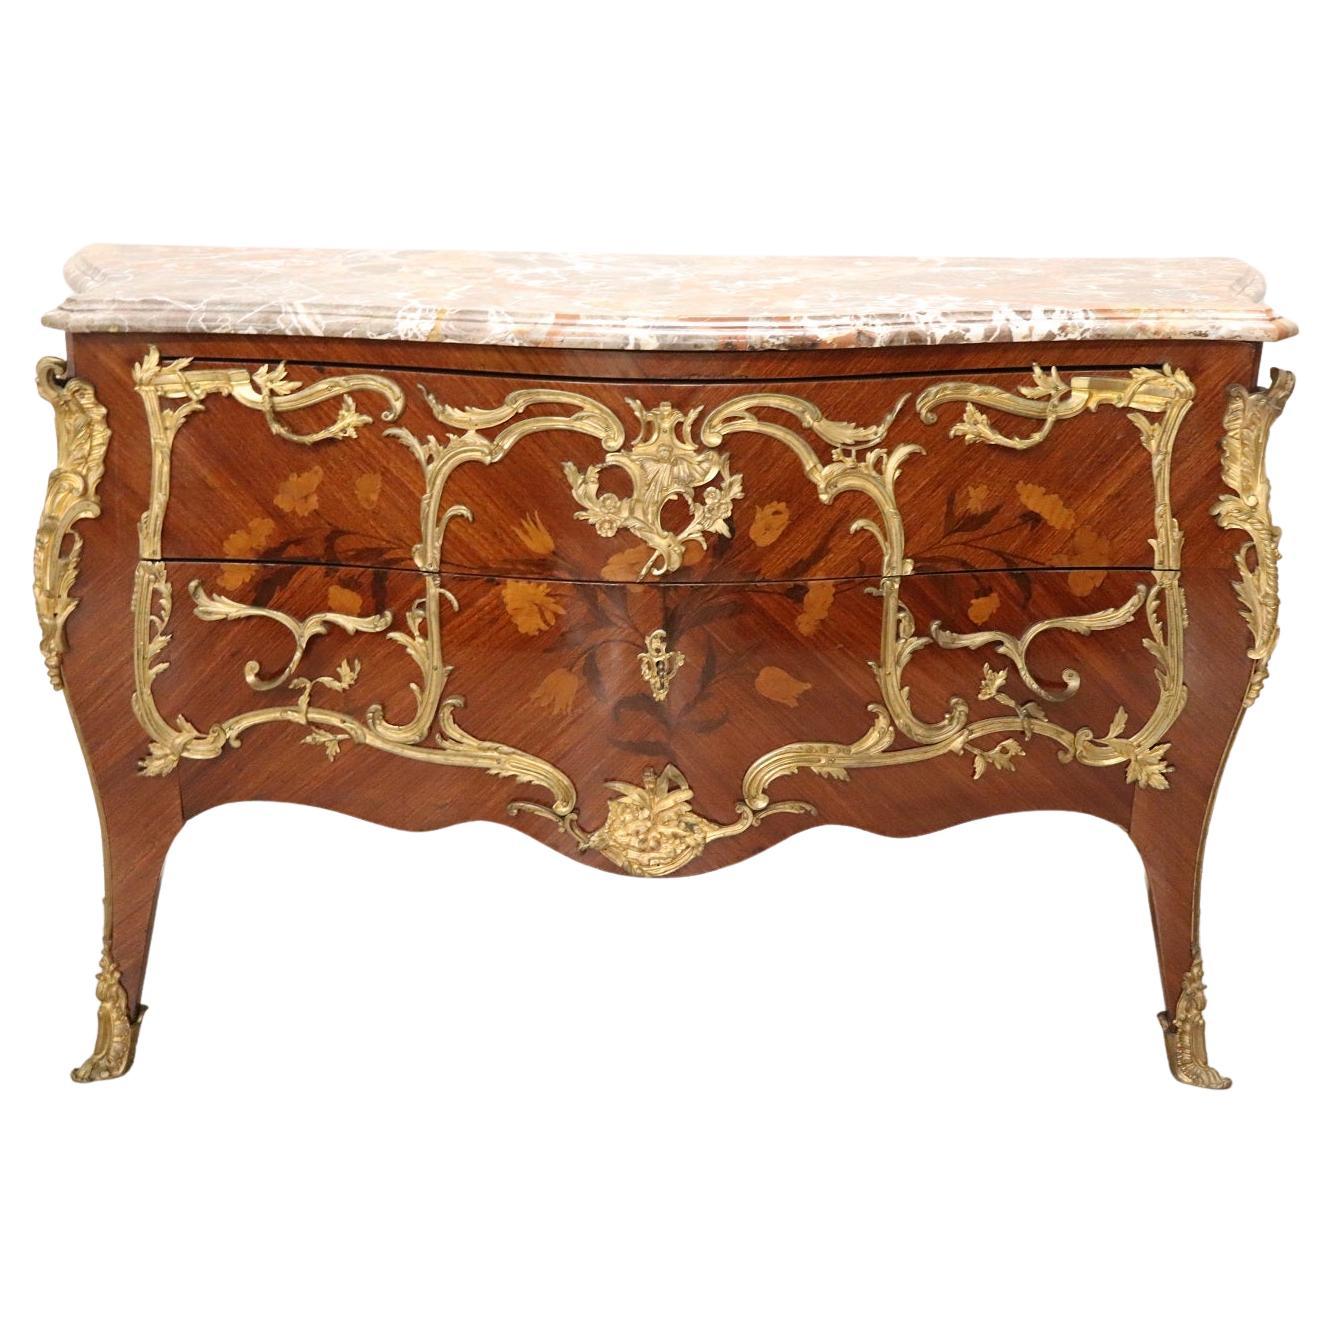 19th Century Napoleon III Inlaid Wood and Gilded Bronze Antique Chest of Drawers For Sale